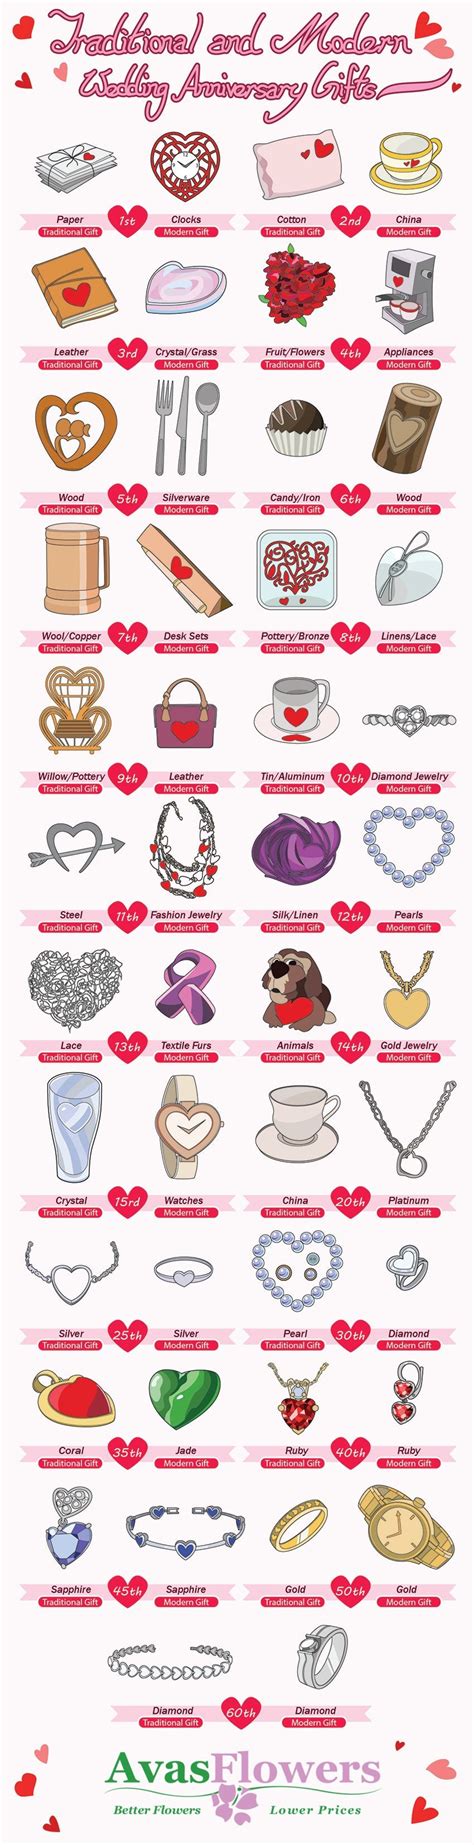 Anniversary gifts by year tradition. Traditional and Modern Wedding Anniversary Gifts : coolguides